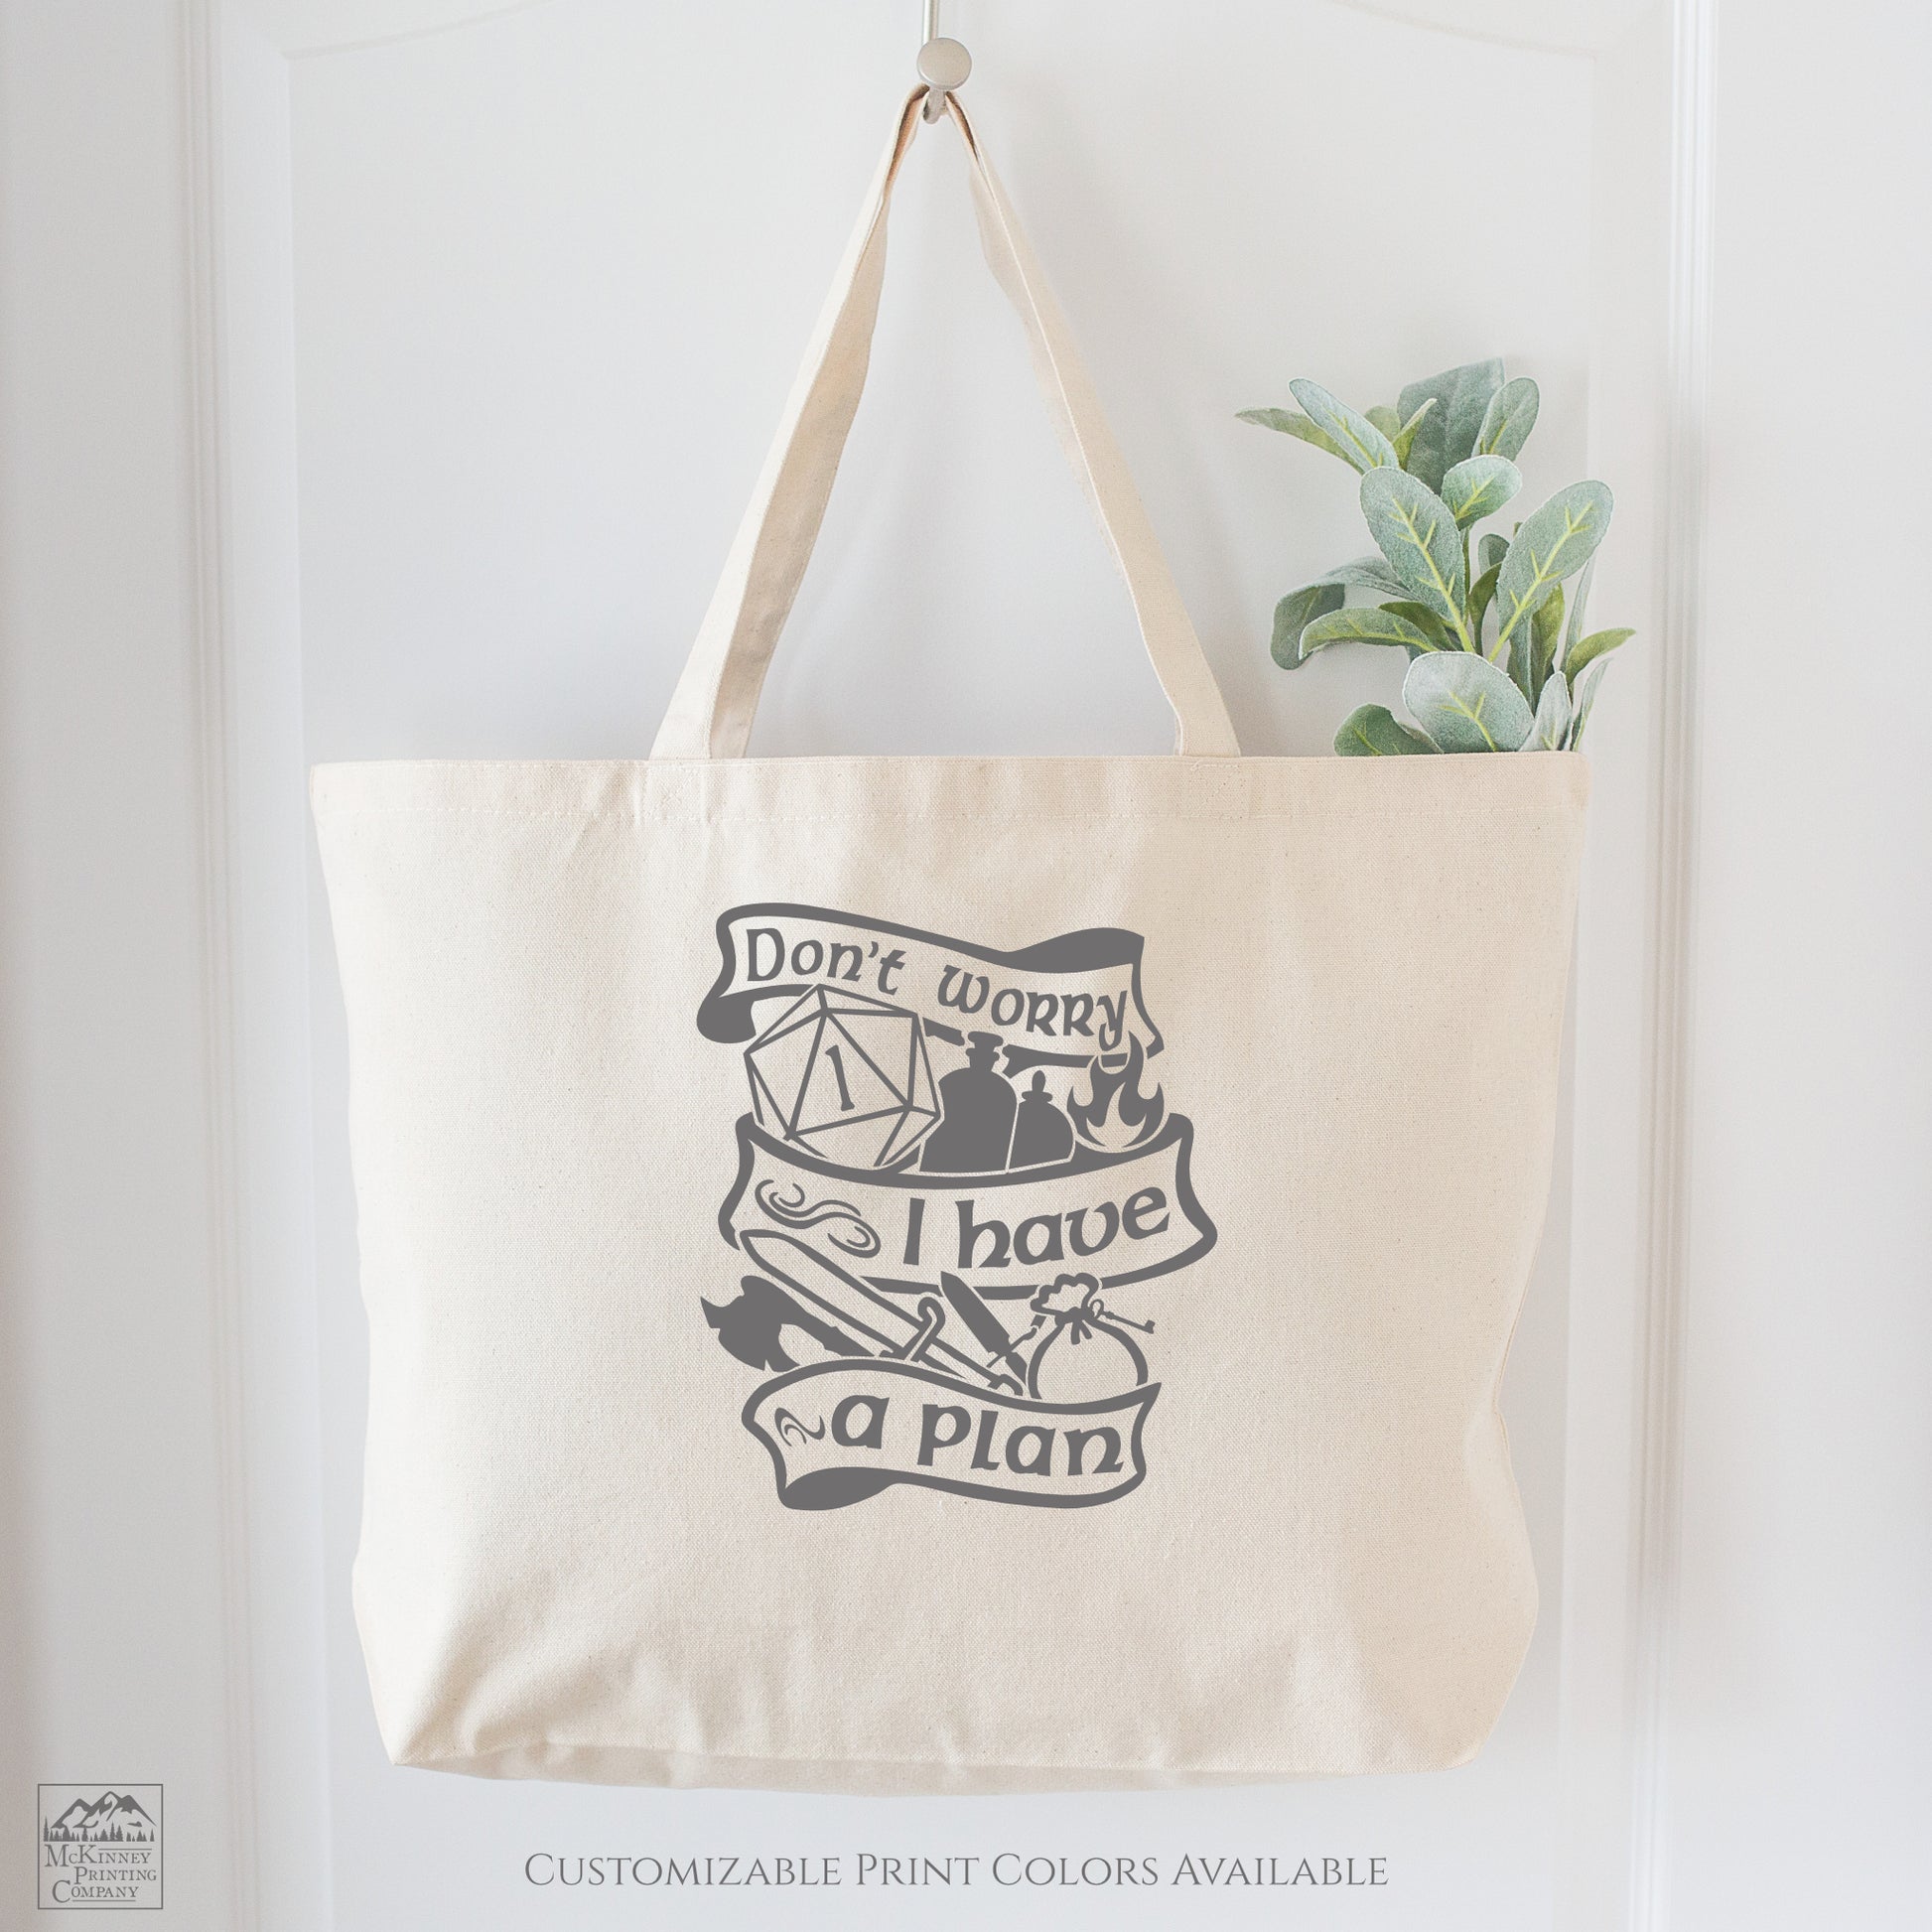 Dungeon and Dragons, Bag of Holding, Canvas Tote Bag with Zipper, DND